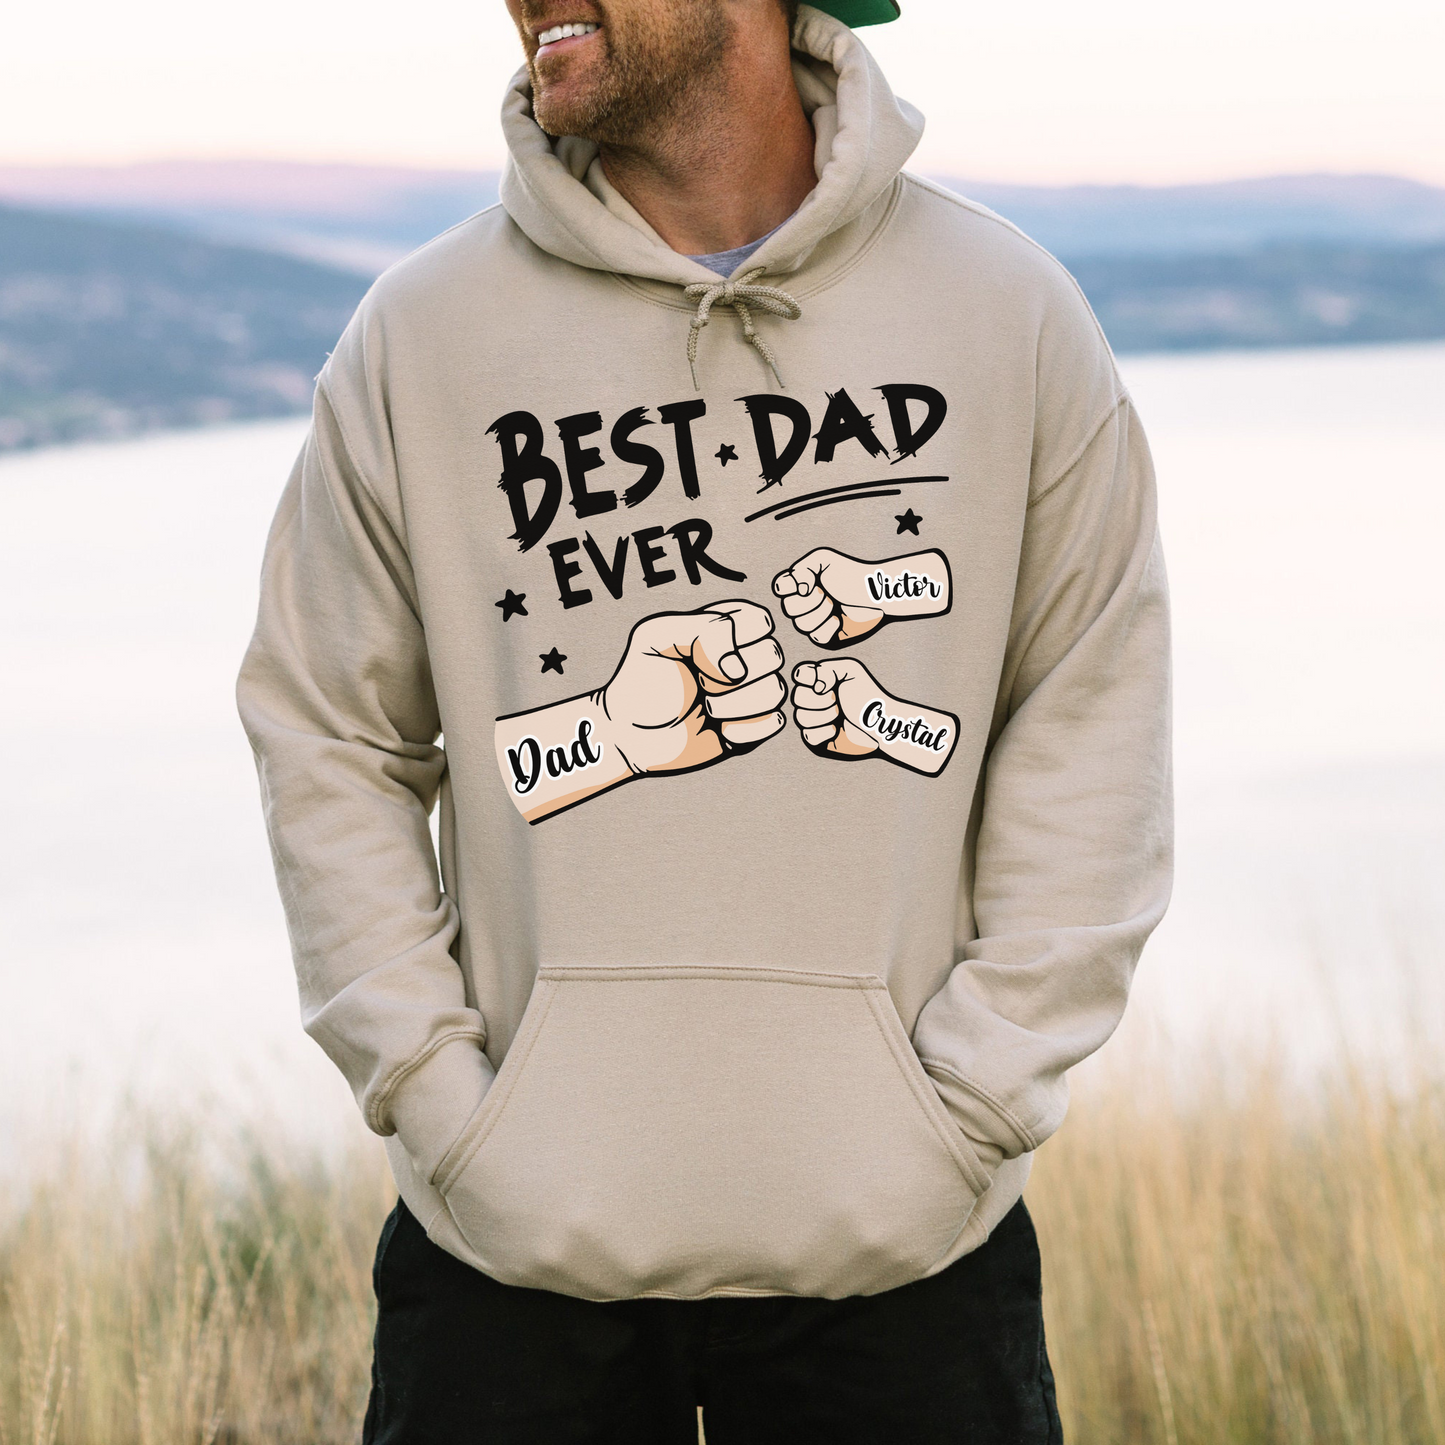 Dad and Kid Fist Bump - Personalized Father's Day Gift